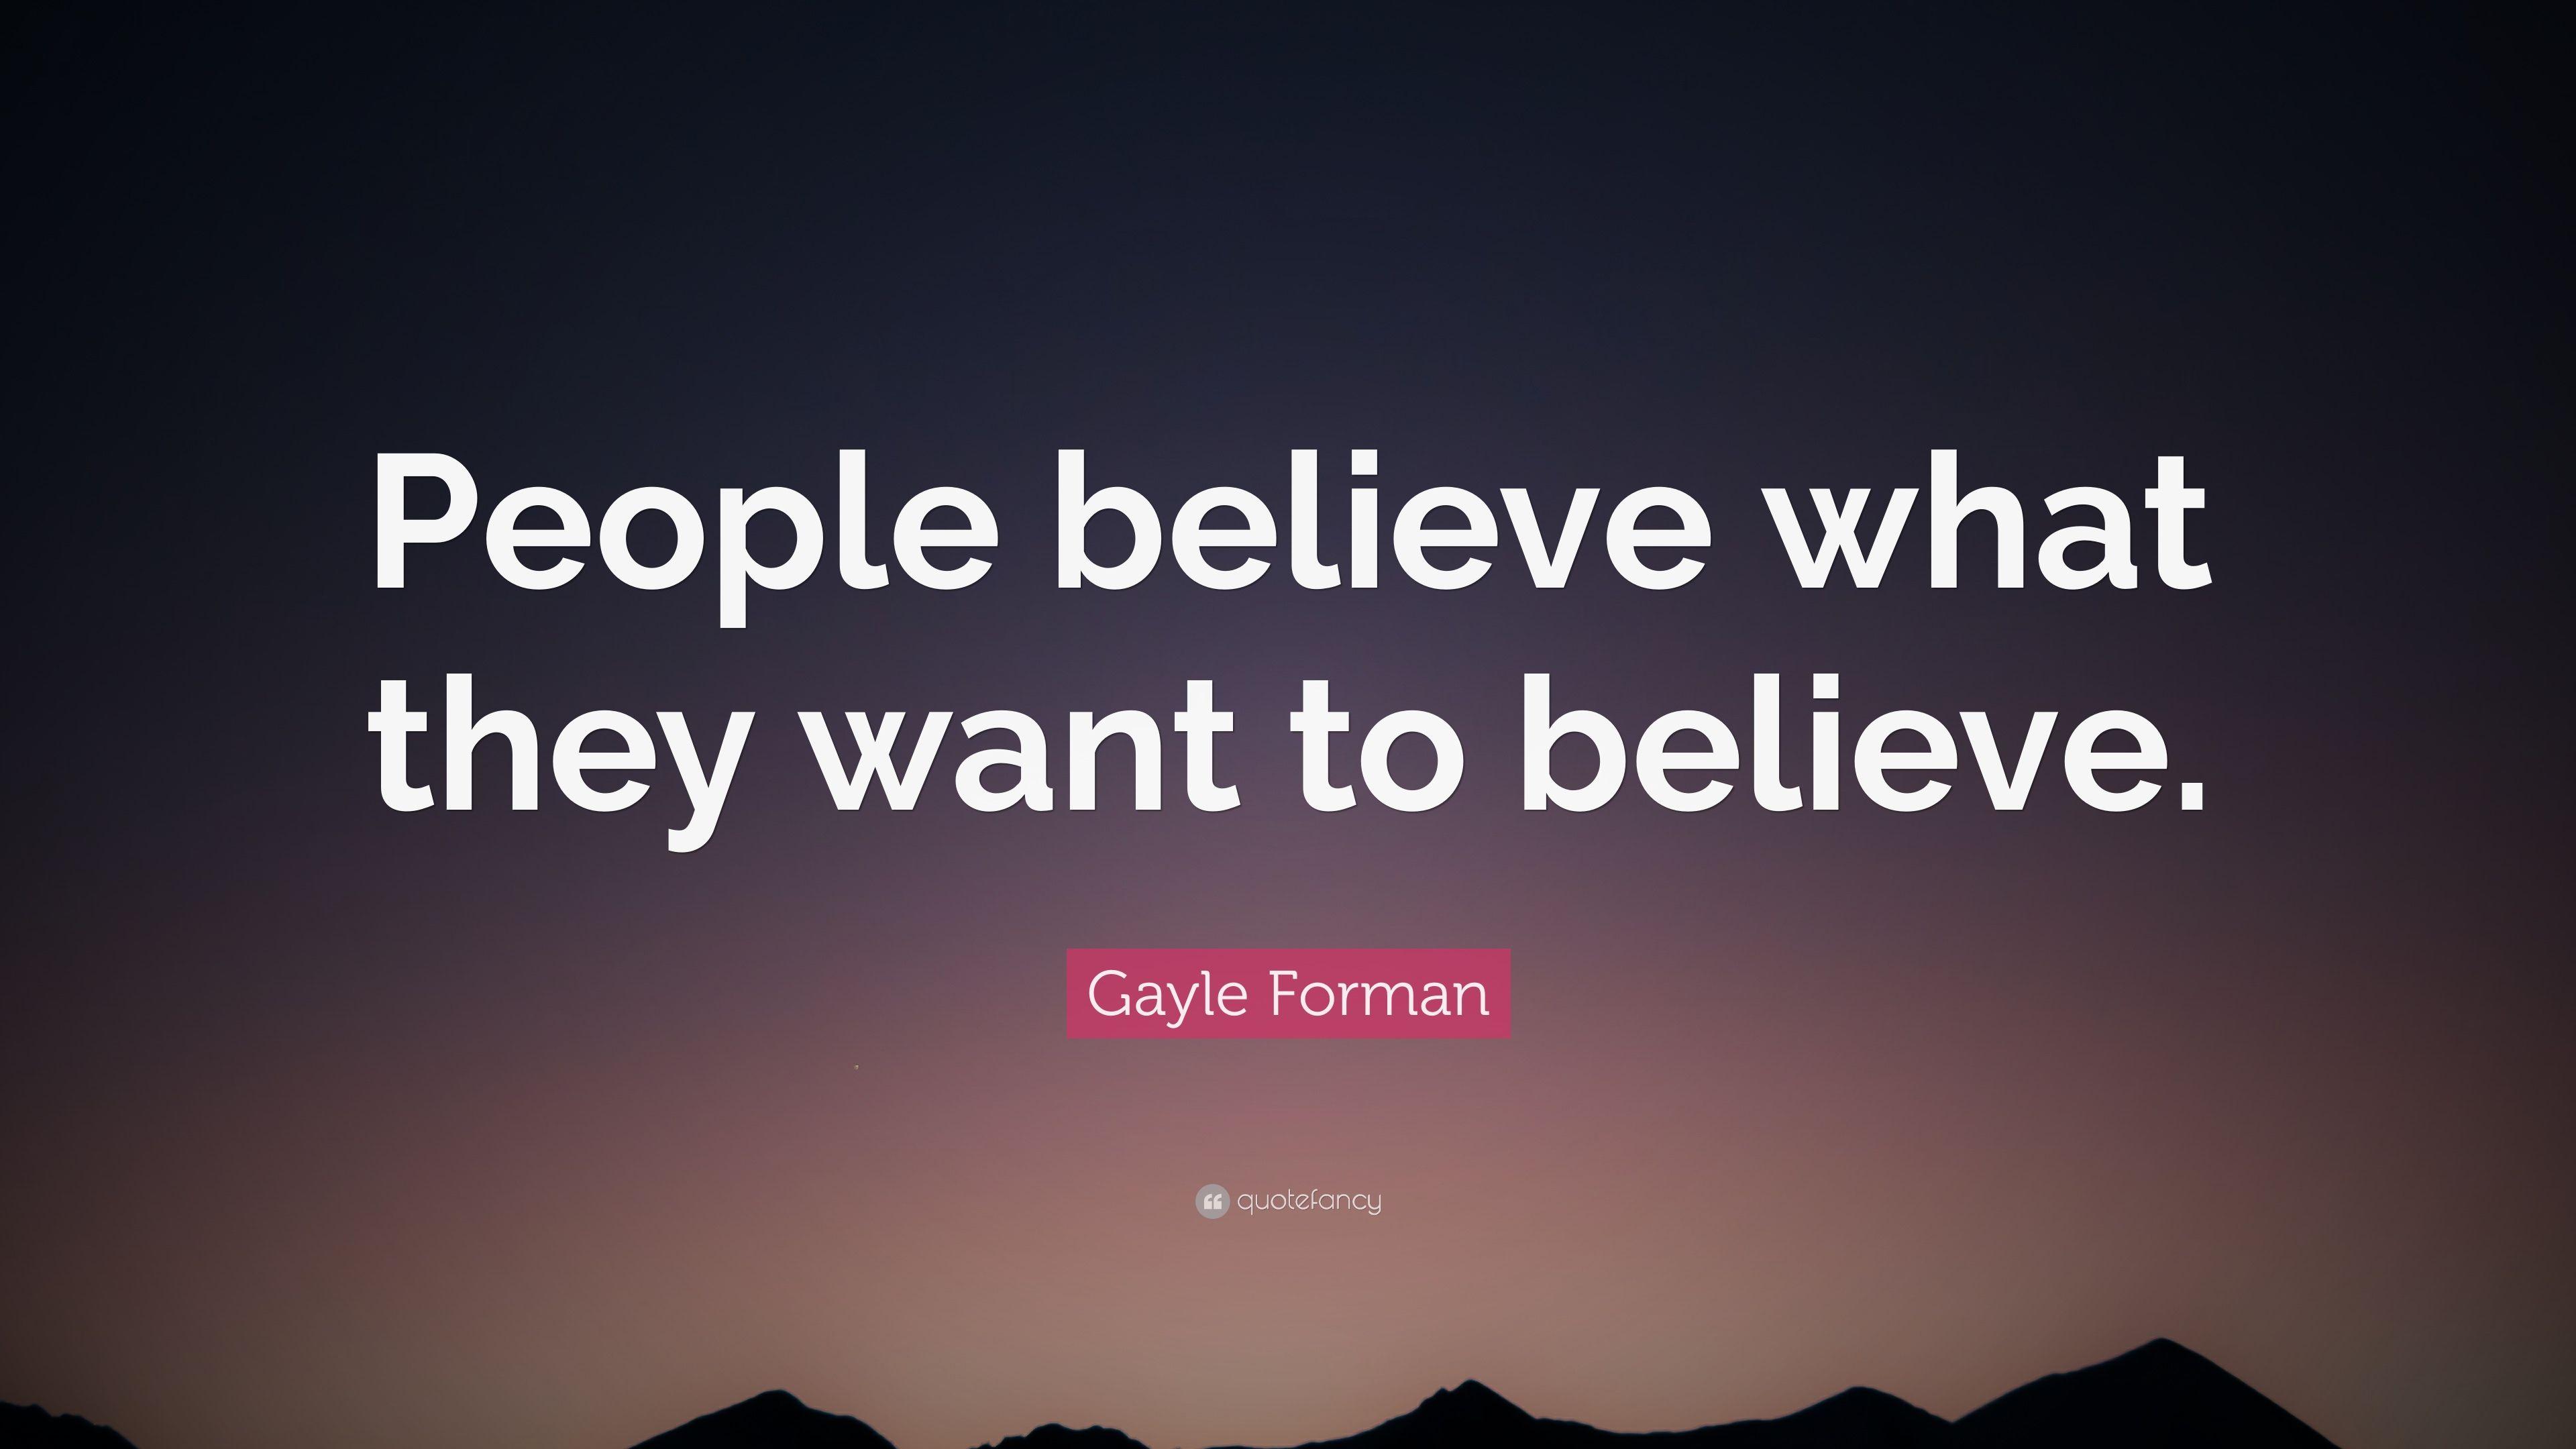 Gayle Forman Quote: “People believe what they want to believe.” 12